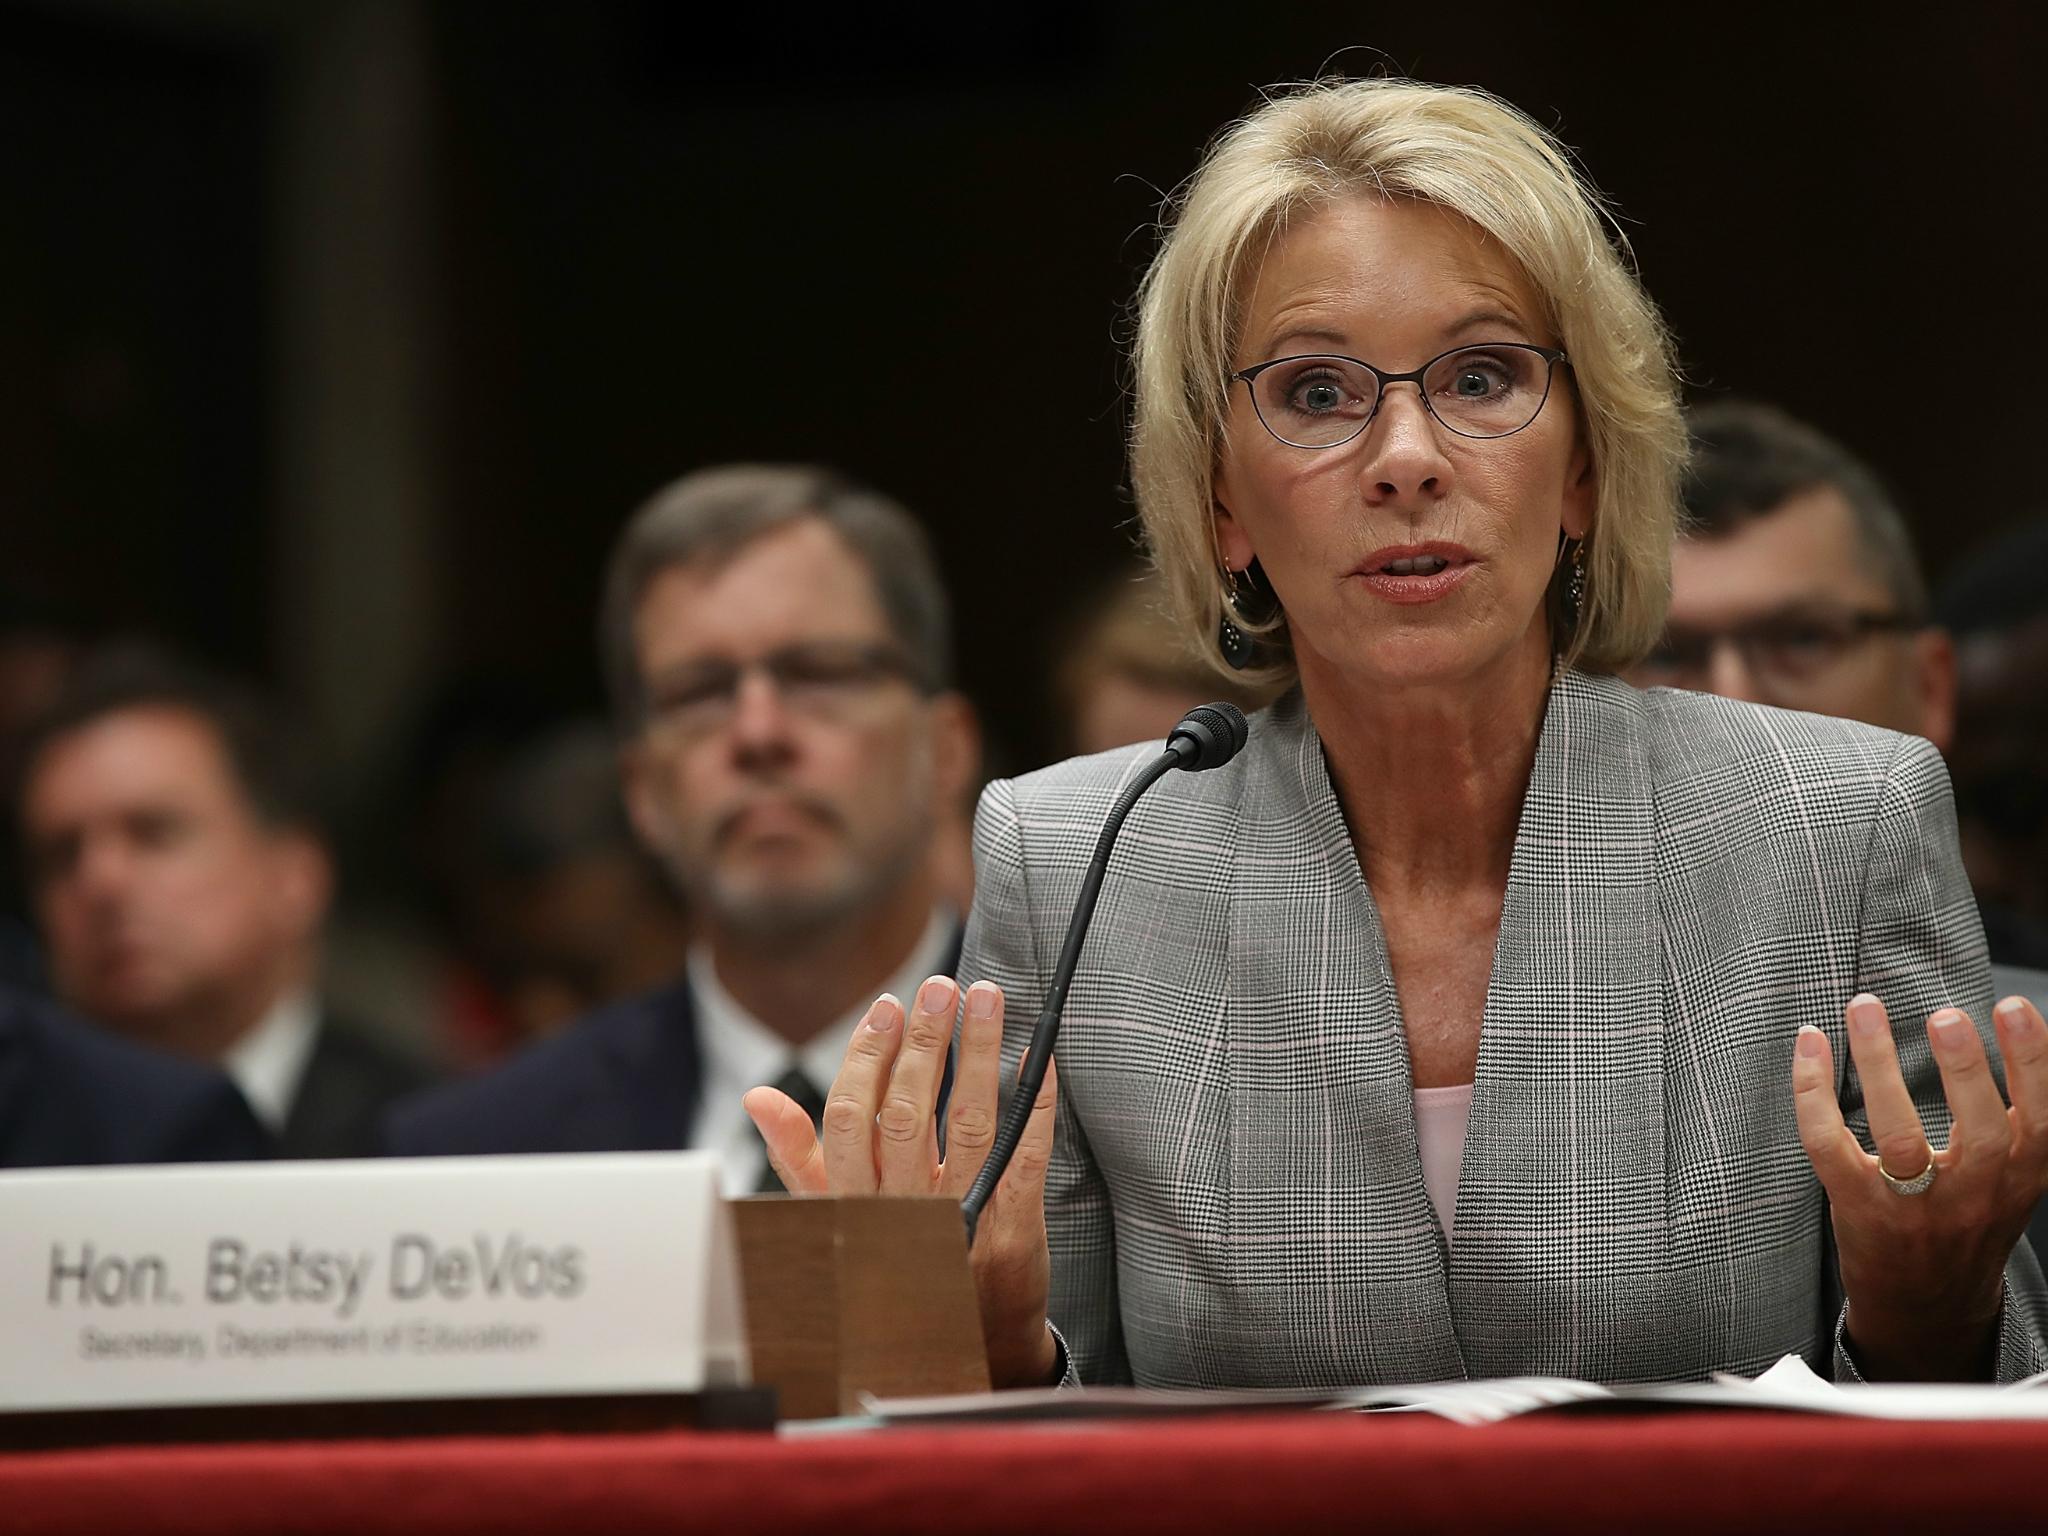 US Department of Education Secretary Betsy DeVos said a school safety commission established after the Florida shooting will not assess the impact of guns on school shootings